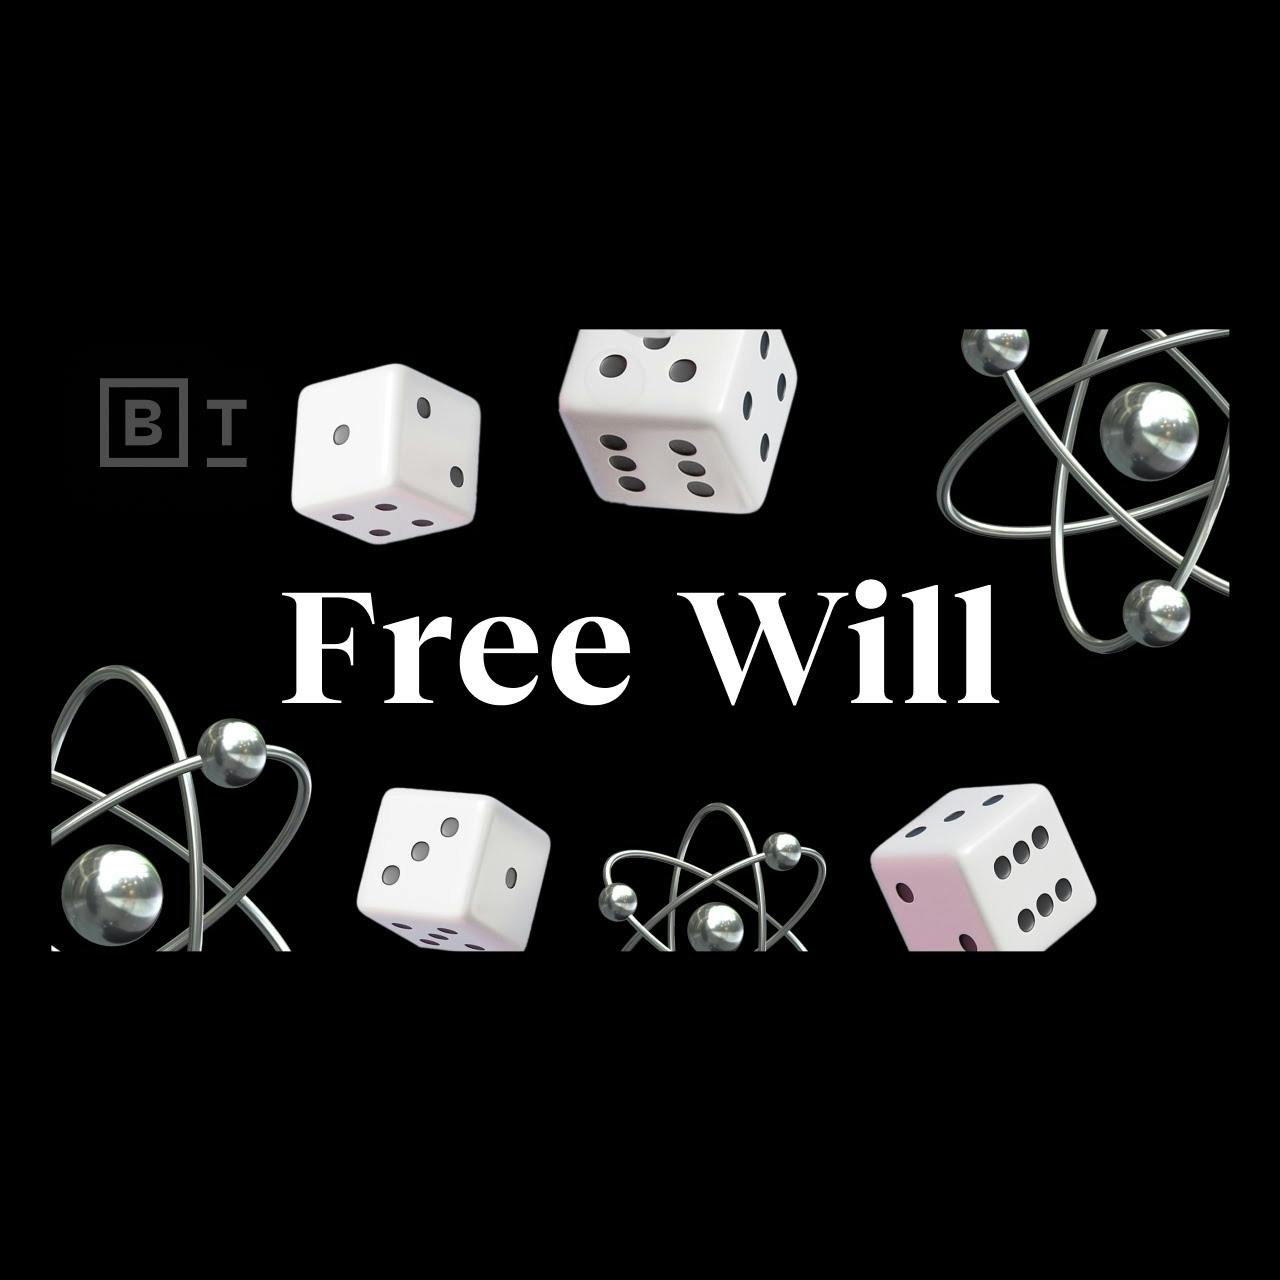 Does free will violate the laws of physics? | Sean Carroll | Big Think